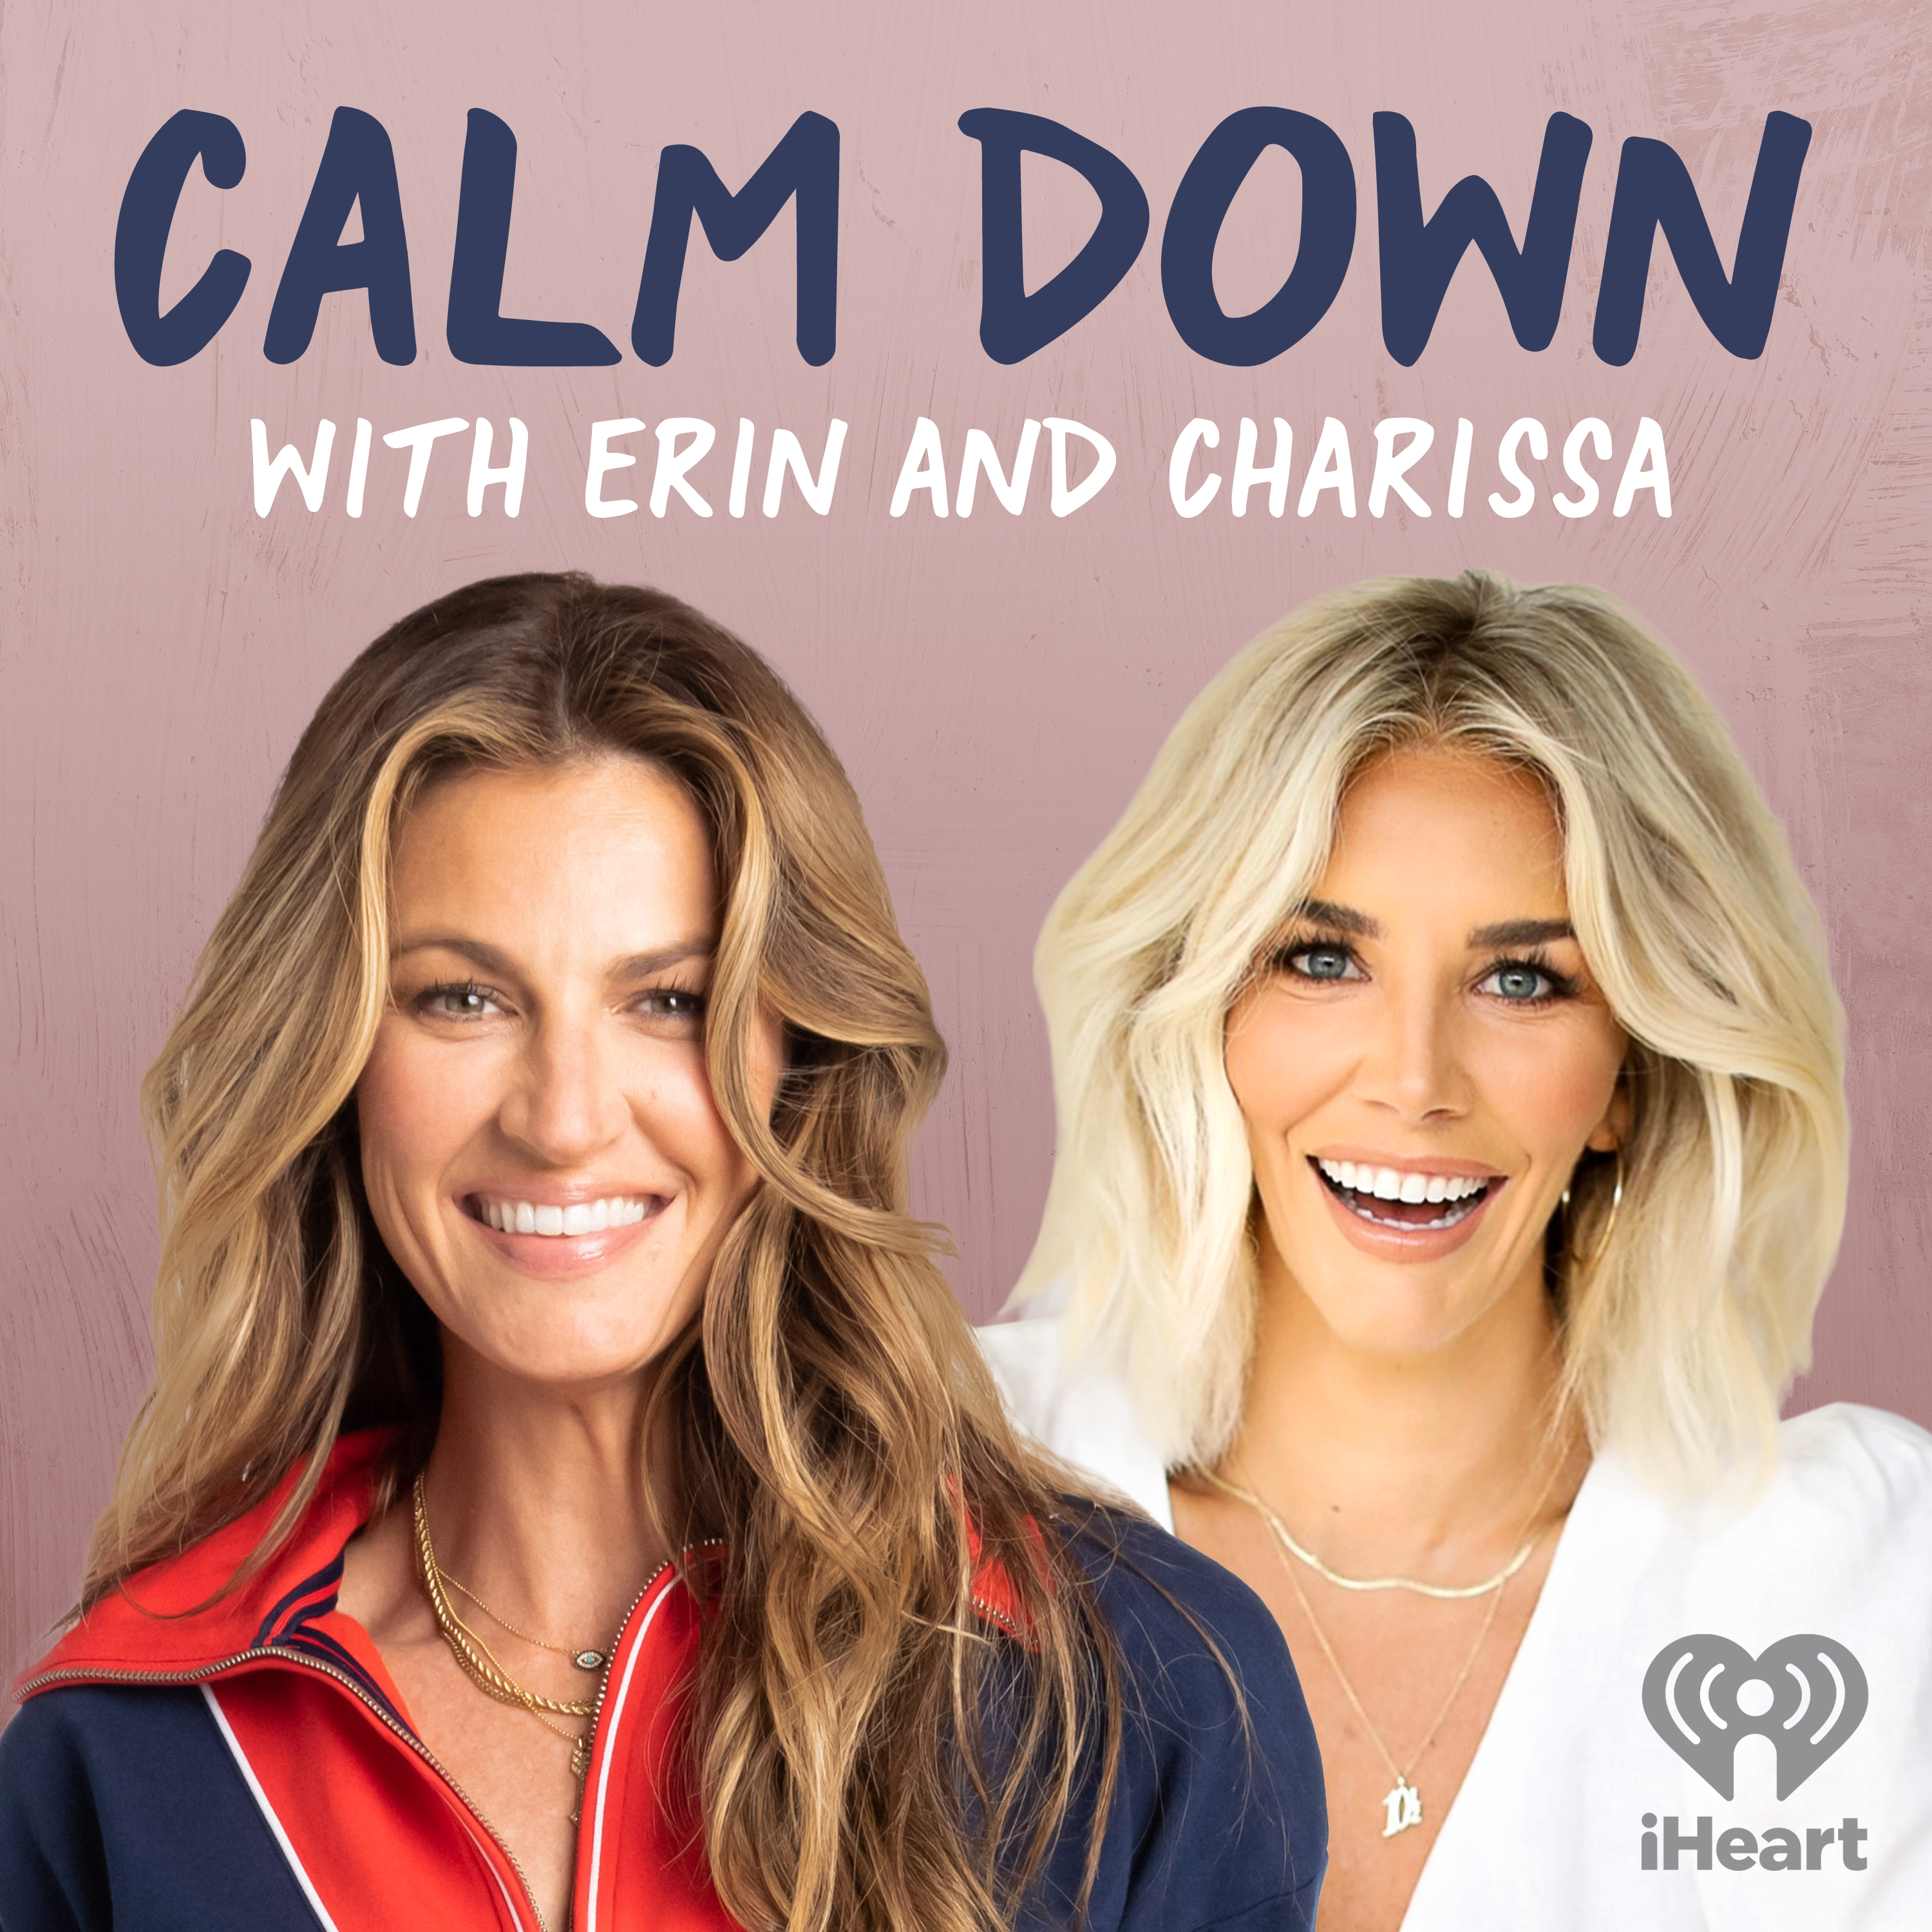 Episode 237: Taylor Swift’s New Album – CAN’T CALM DOWN!